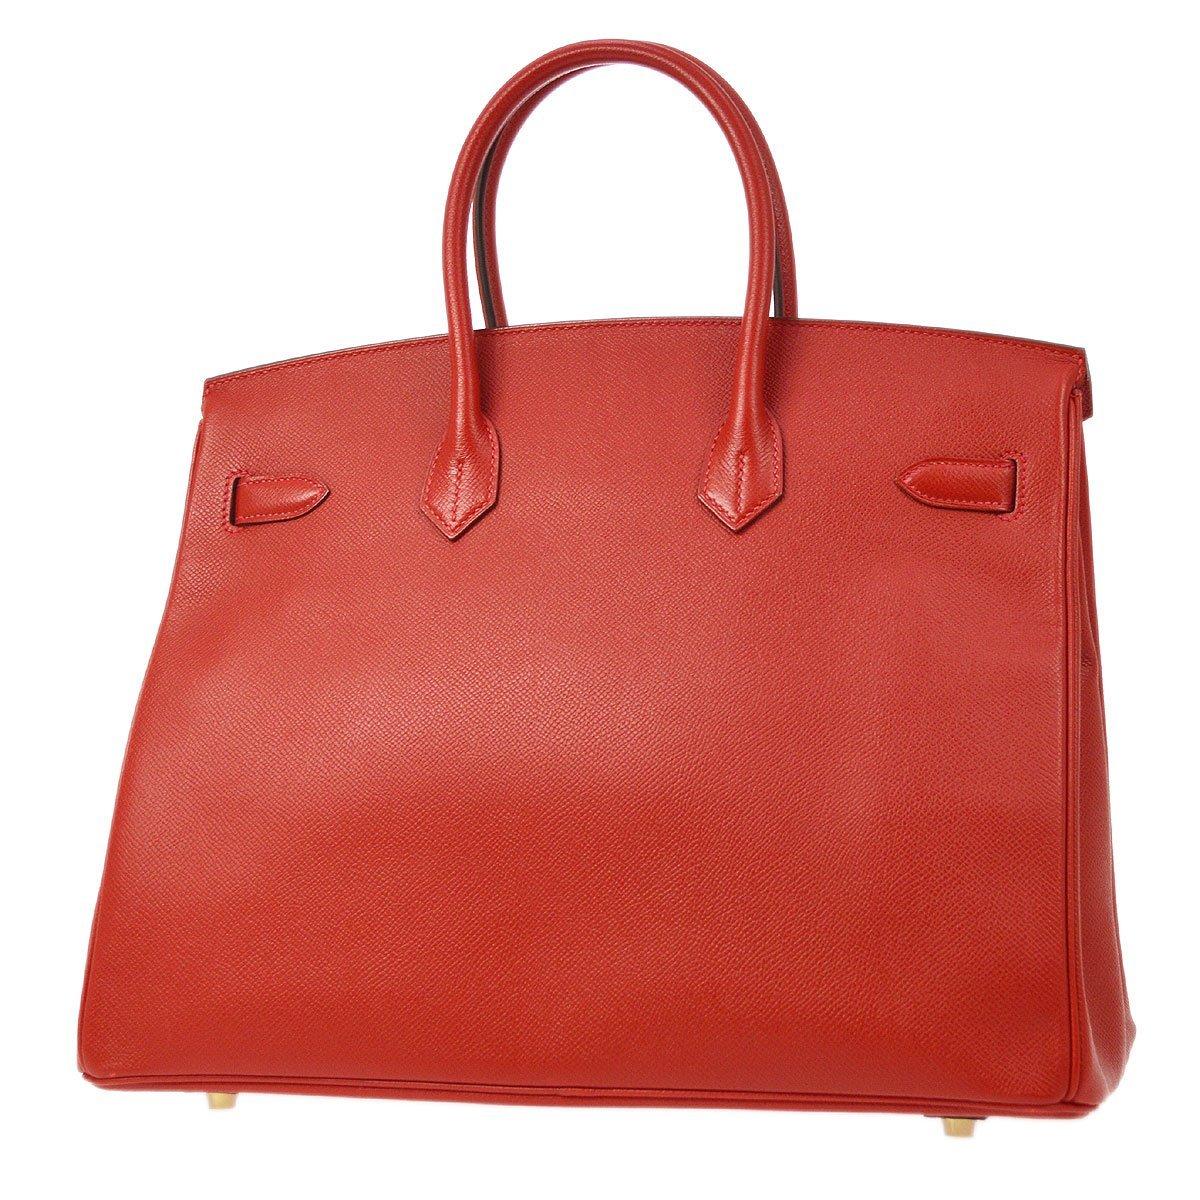 Women's HERMES Birkin 35 Red Epsom Leather Gold Hardware Top Handle Tote Bag in Box